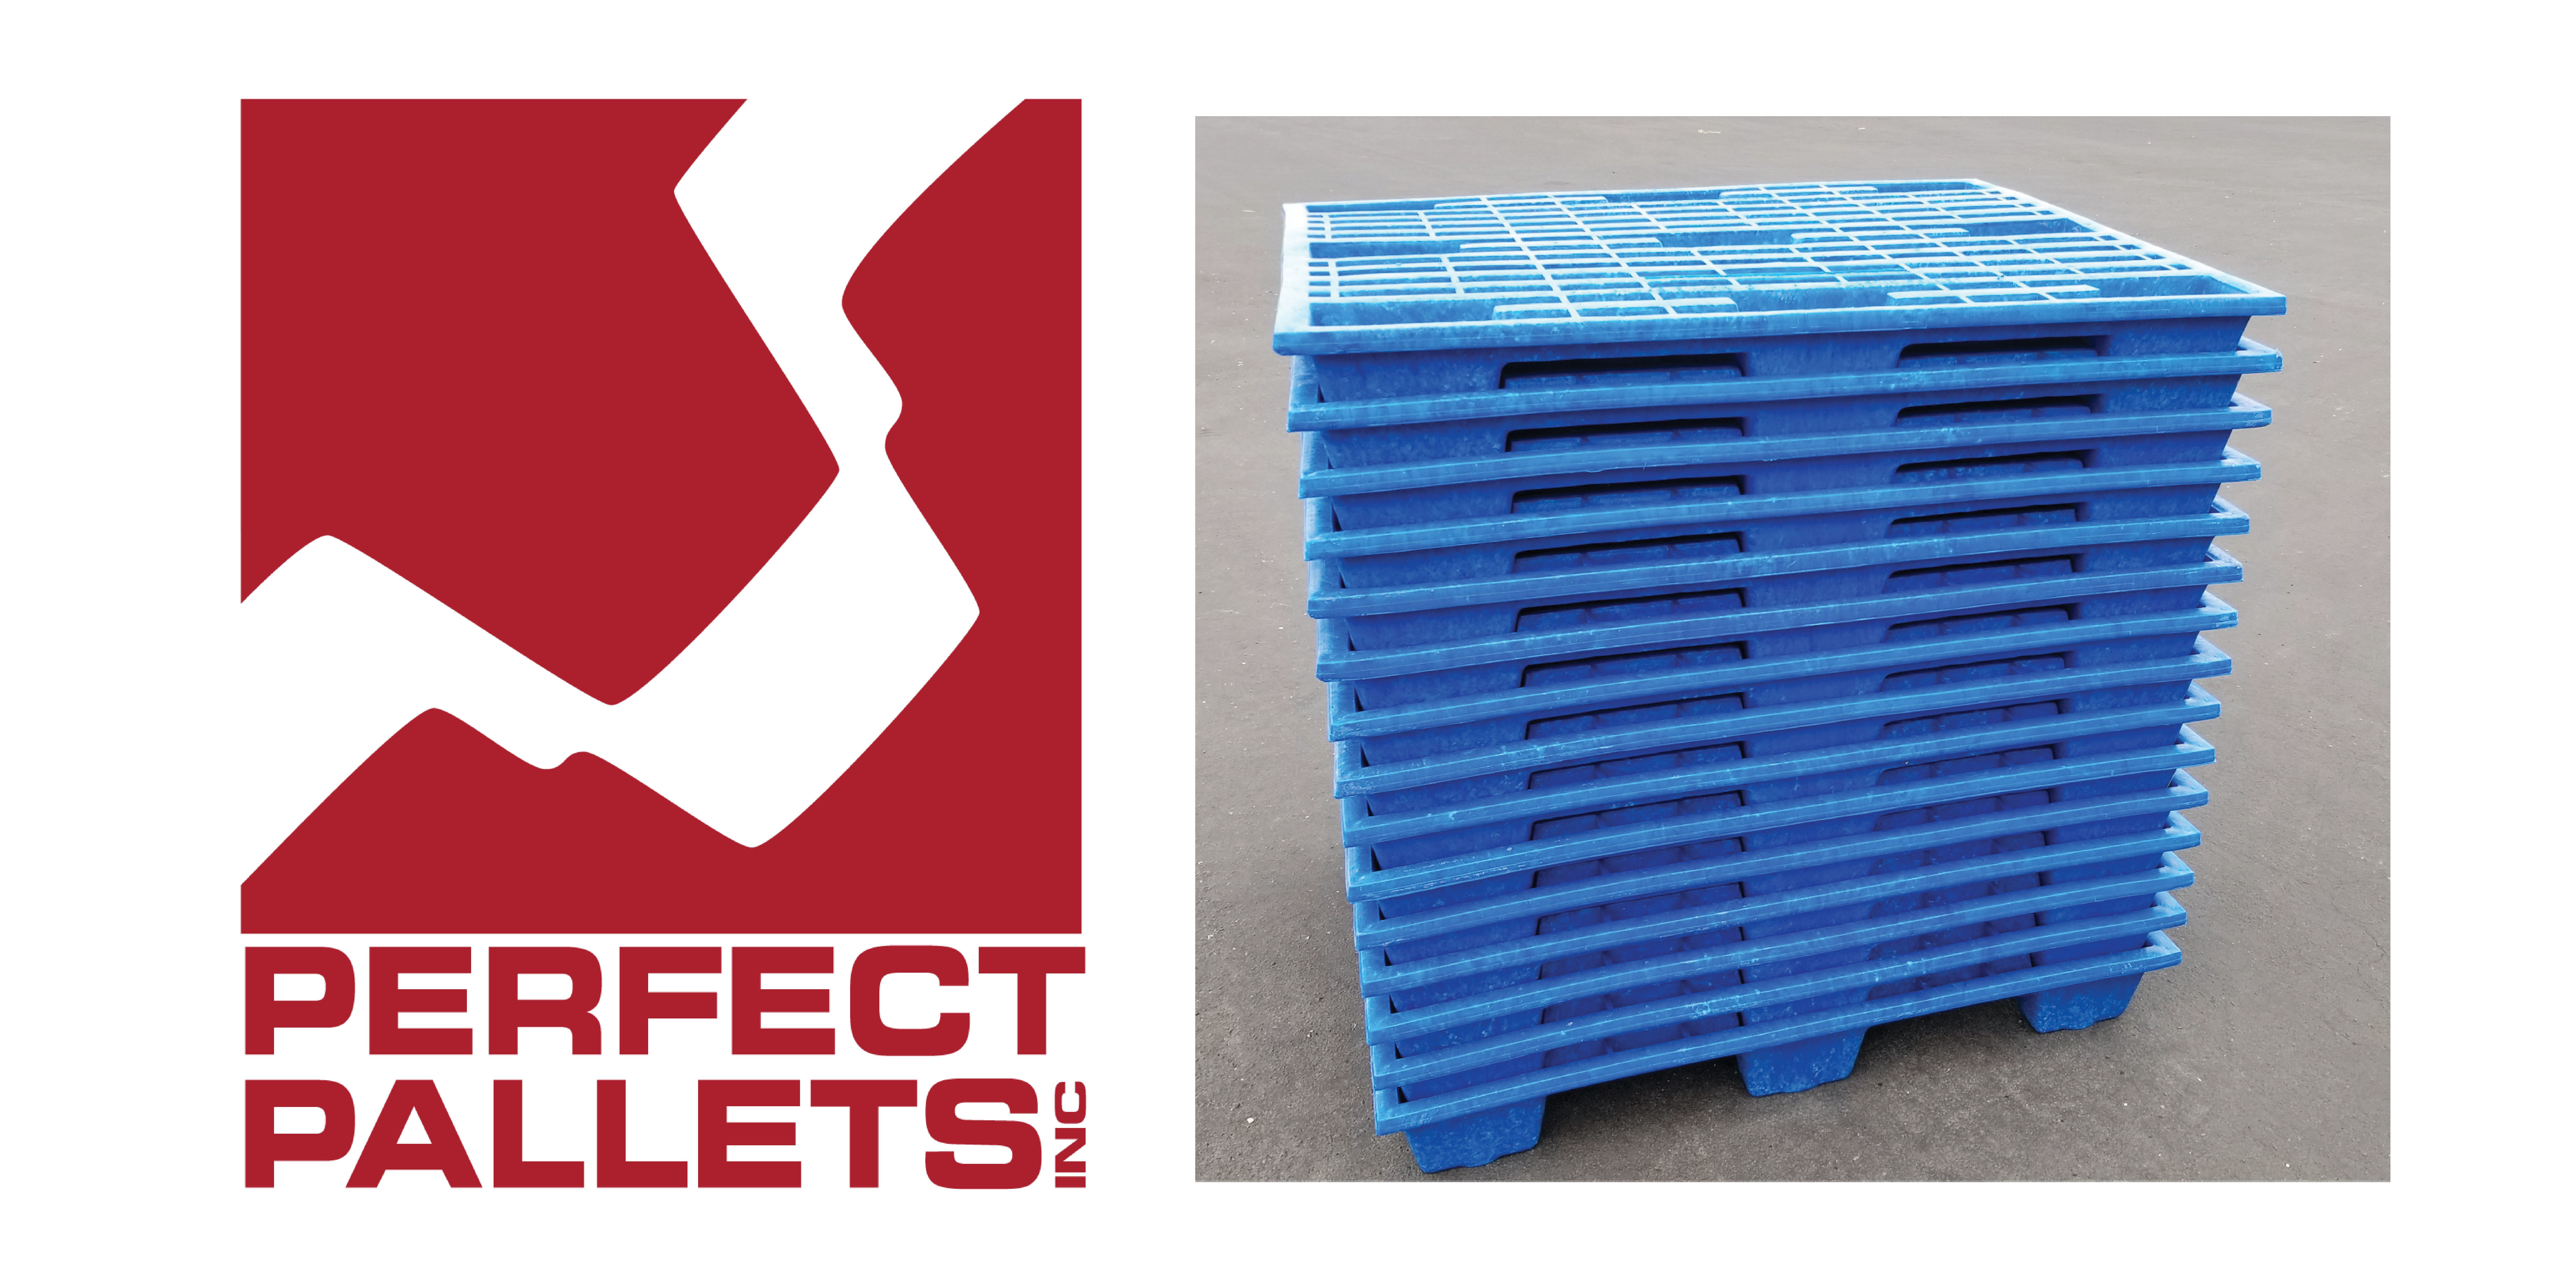 Leading Plastic Pallet Provider Partners with Microban® International